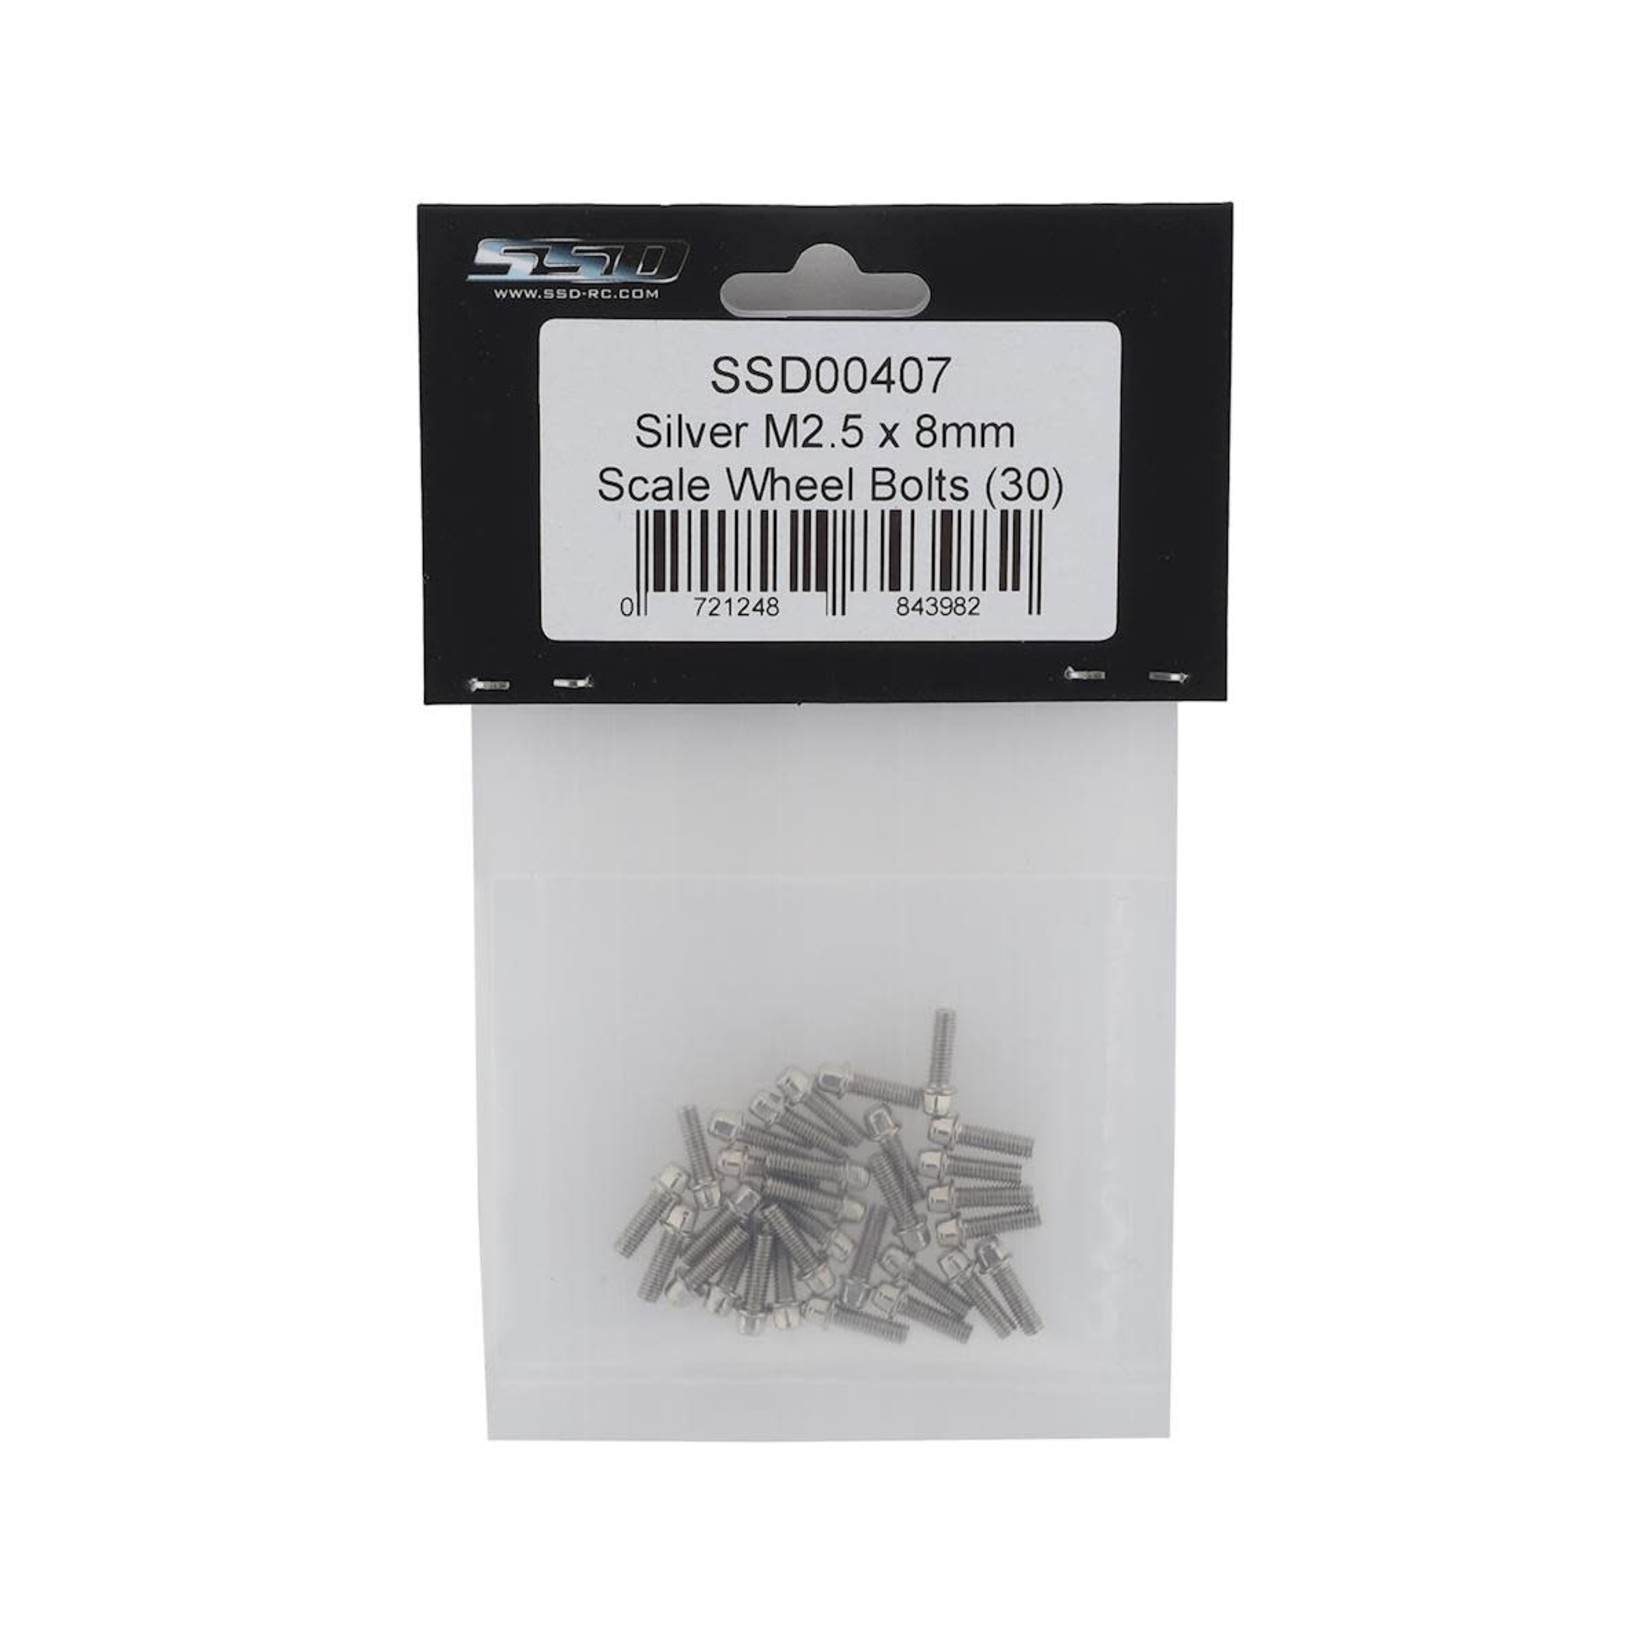 SSD RC SSD RC 2.5x8mm Scale Wheel Bolts (Silver) (30) #SSD00407